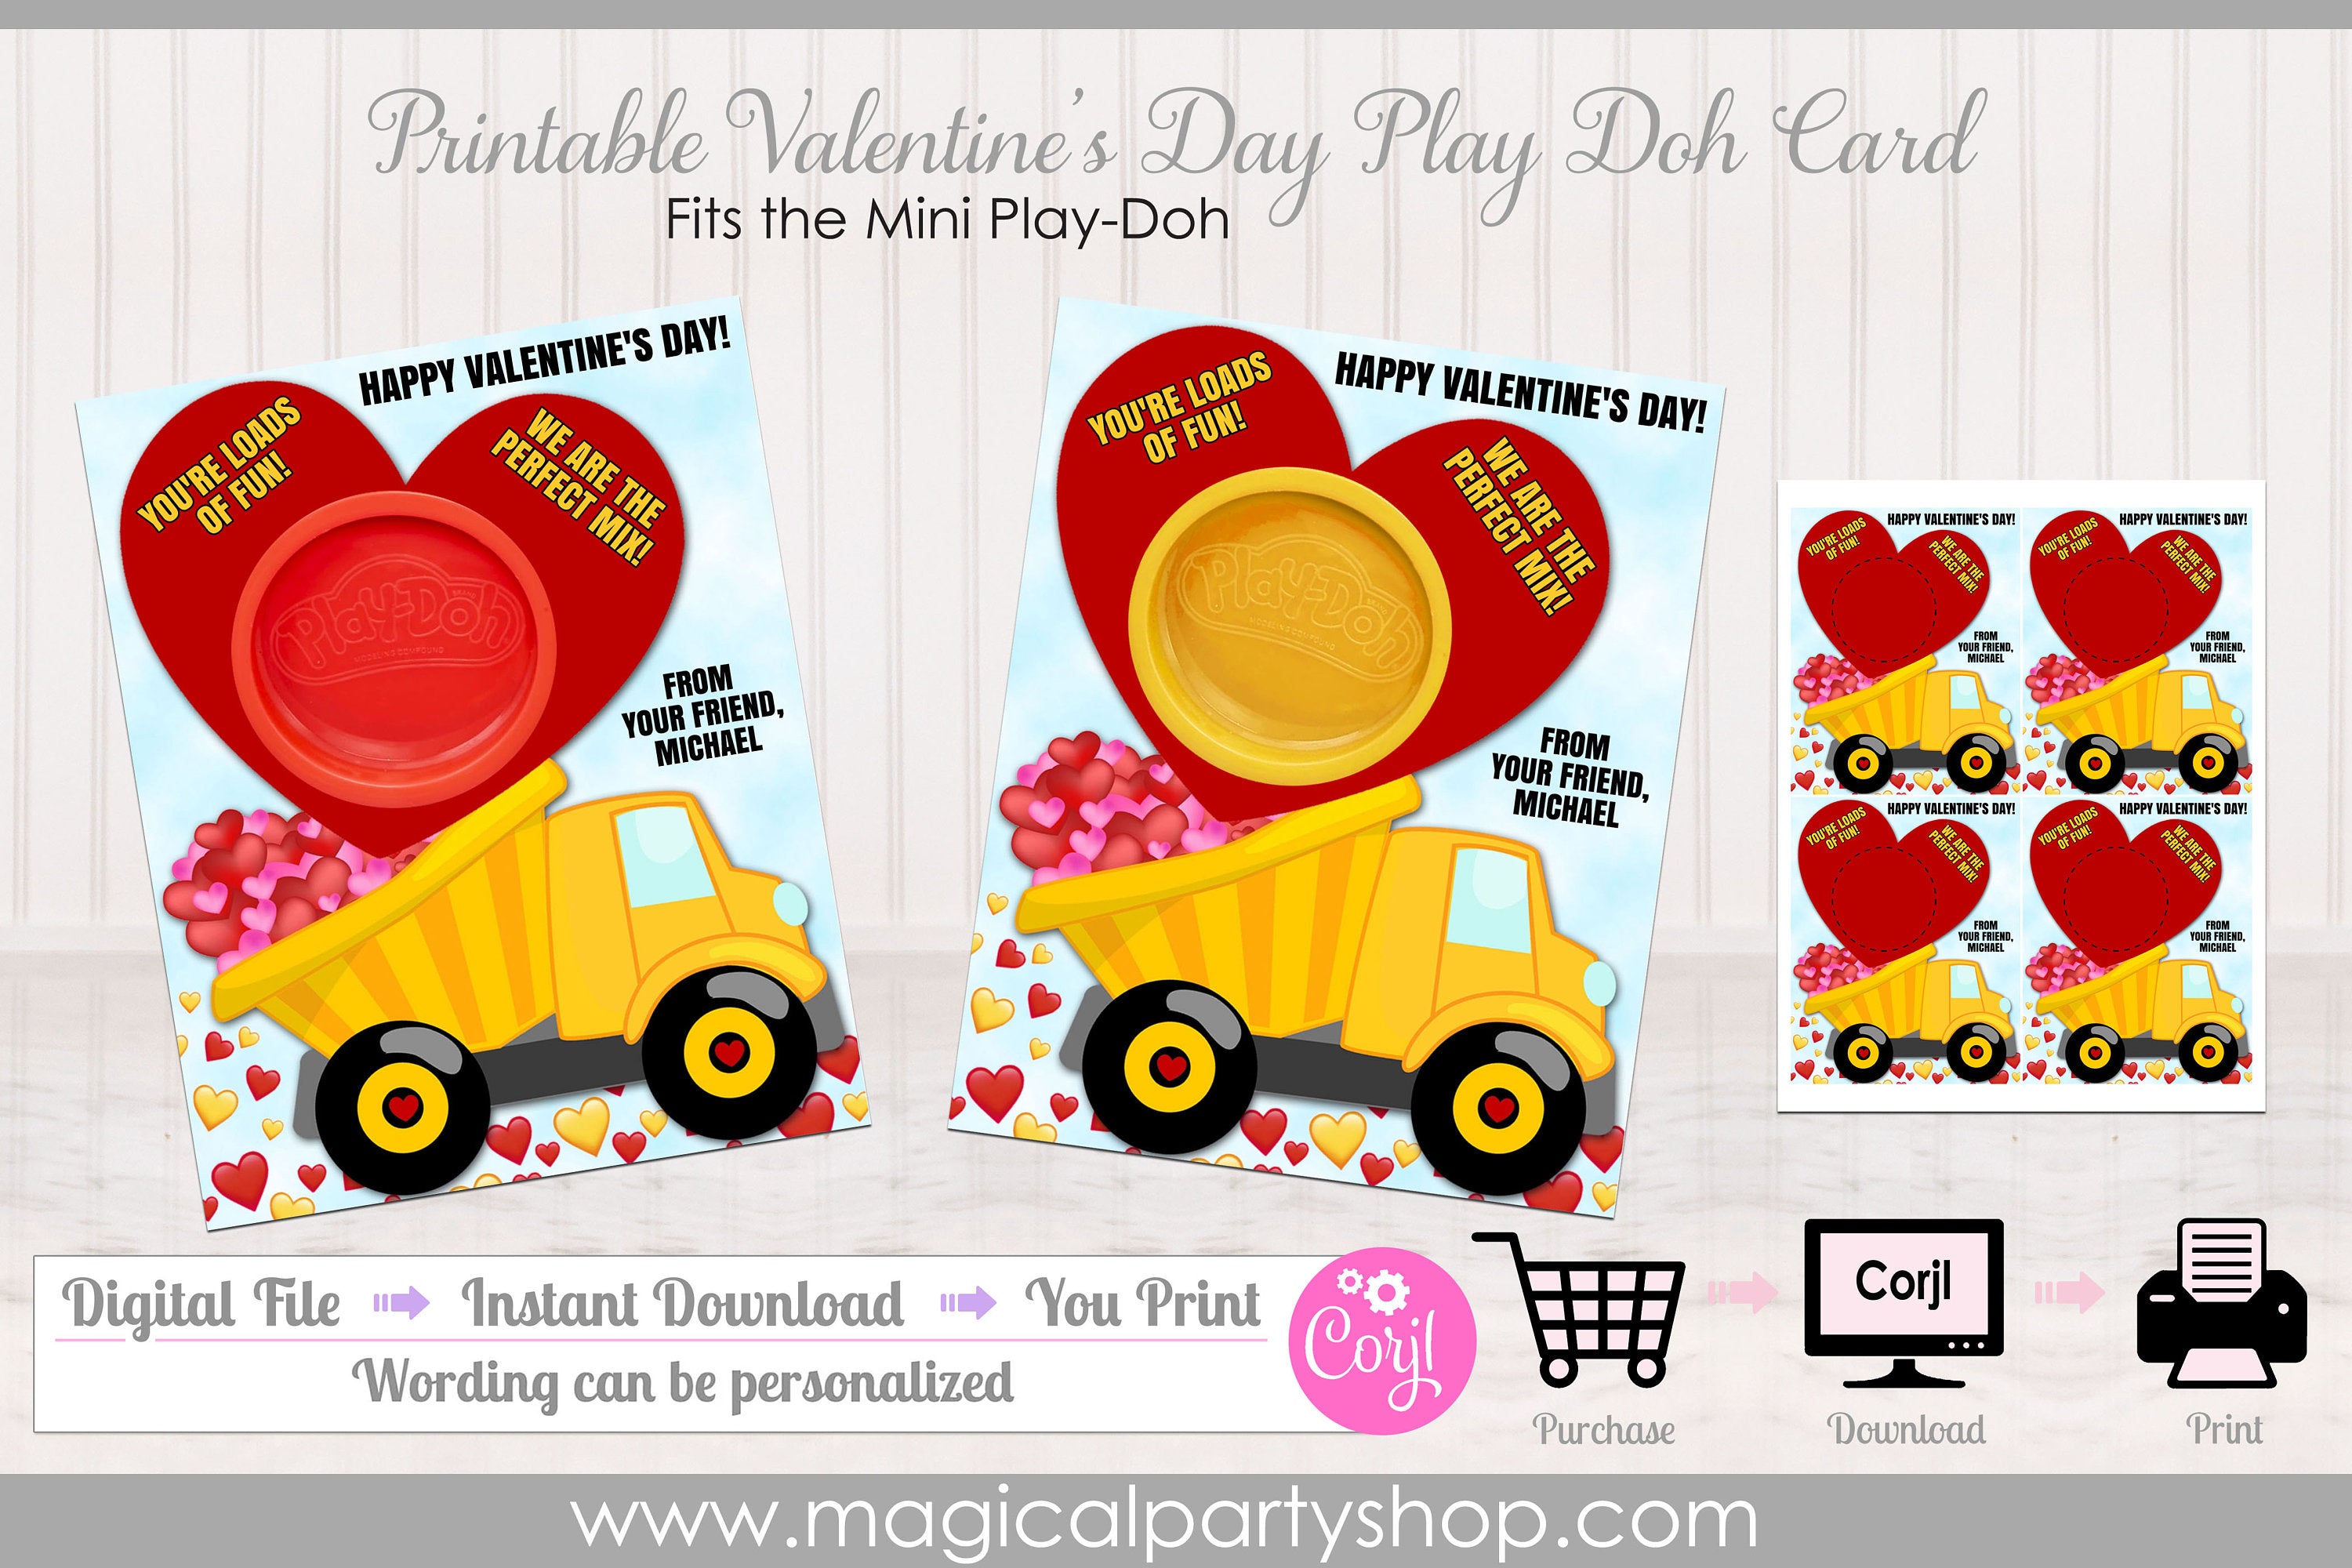 Construction Truck Play-Doh Valentines Gift Card | Printable Class Valentine Day Gifts | Playdoh Gift | Dump Truck | Valentines Class Party